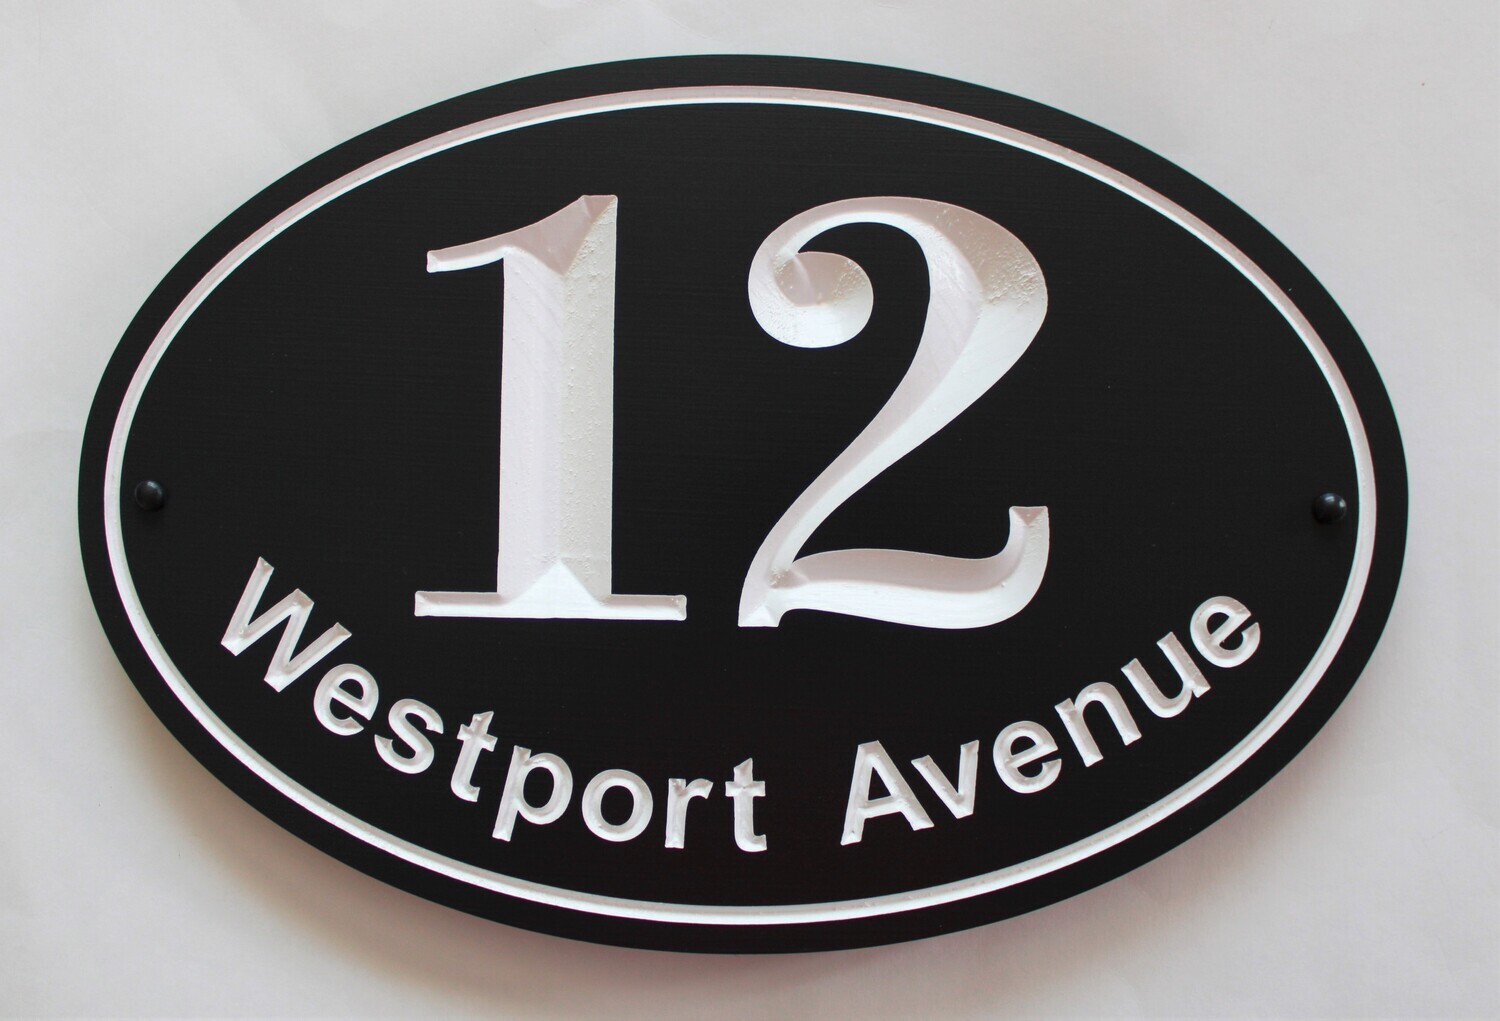 Oval Address Sign - Painted Wood House Number Address Sign - House Number Address Plaque - Street Name Sign